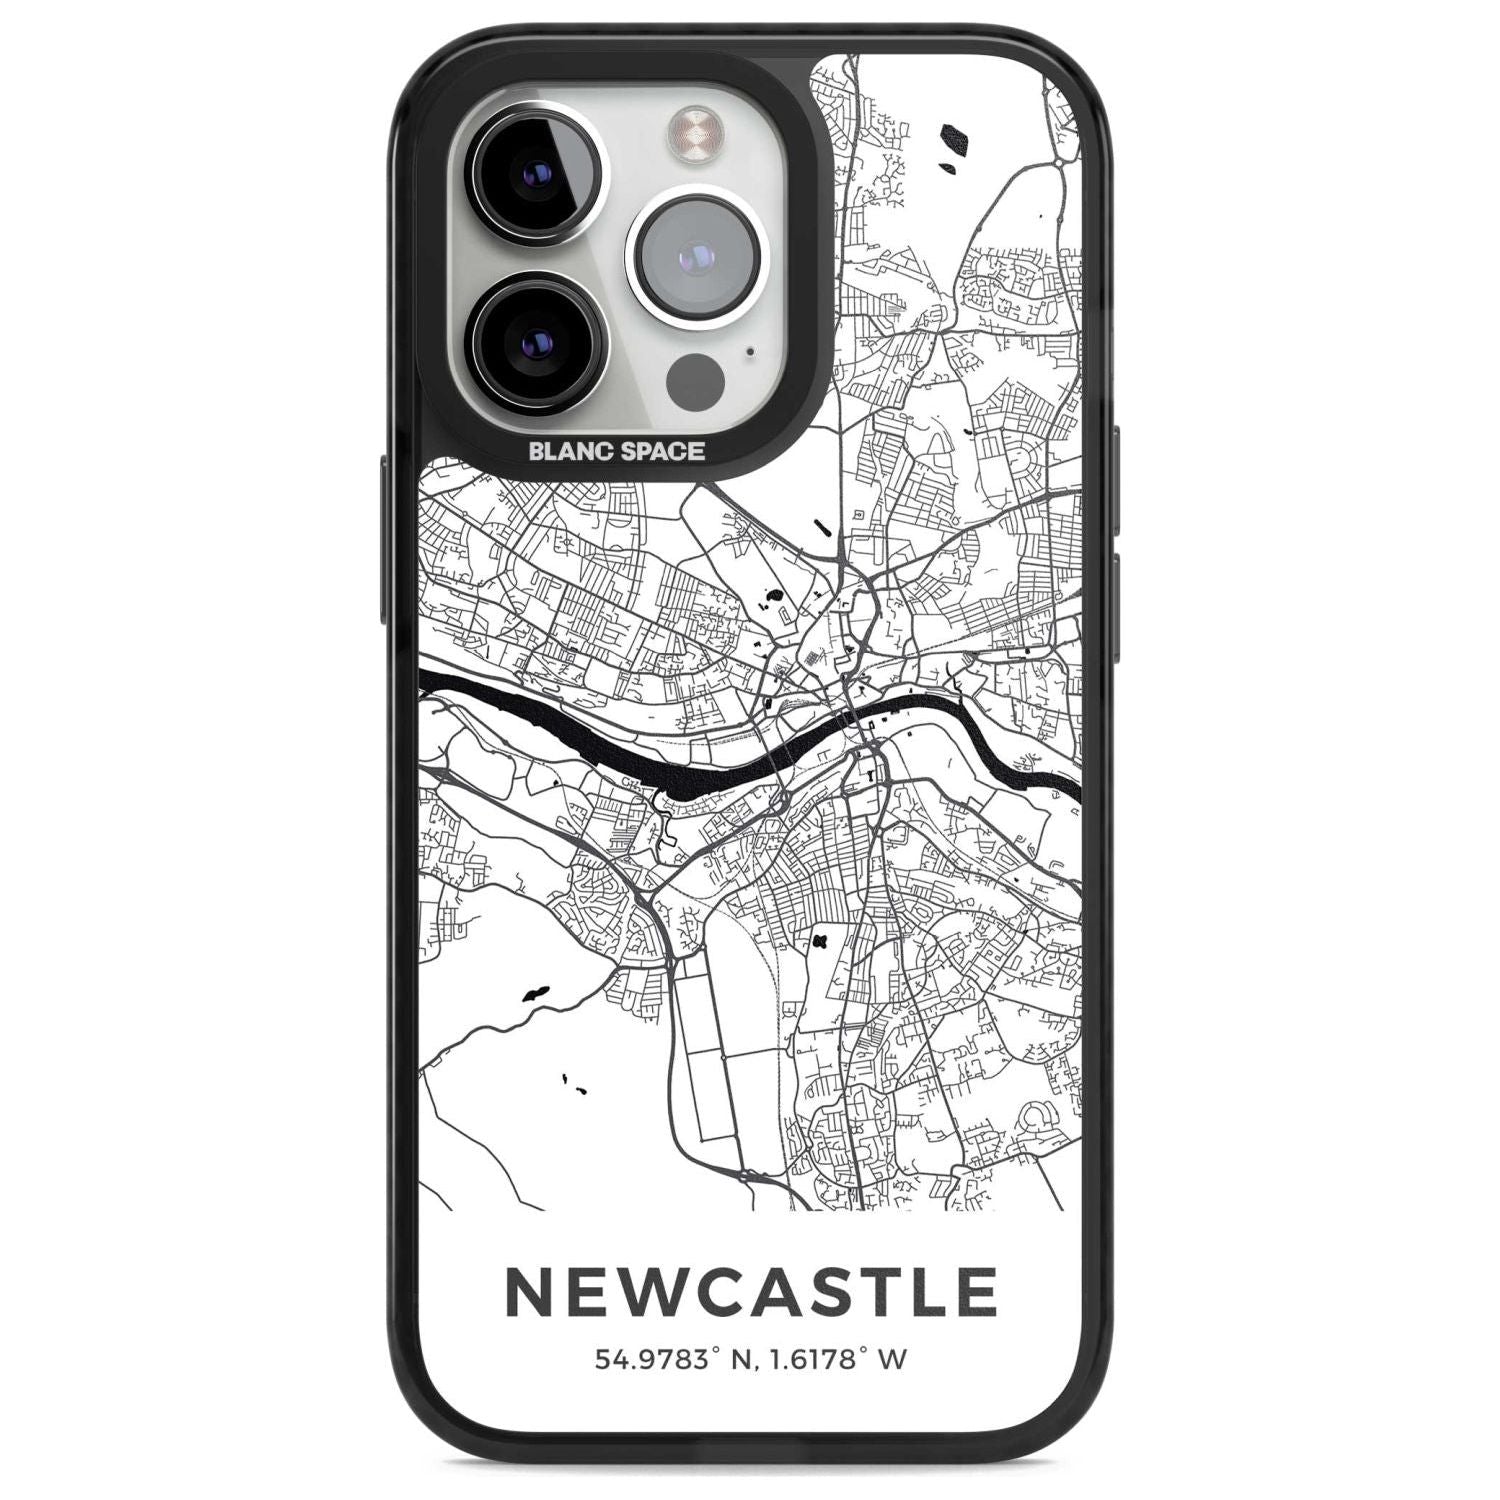 Map of Newcastle, England Phone Case iPhone 15 Pro Max / Magsafe Black Impact Case,iPhone 15 Pro / Magsafe Black Impact Case,iPhone 14 Pro Max / Magsafe Black Impact Case,iPhone 14 Pro / Magsafe Black Impact Case,iPhone 13 Pro / Magsafe Black Impact Case Blanc Space